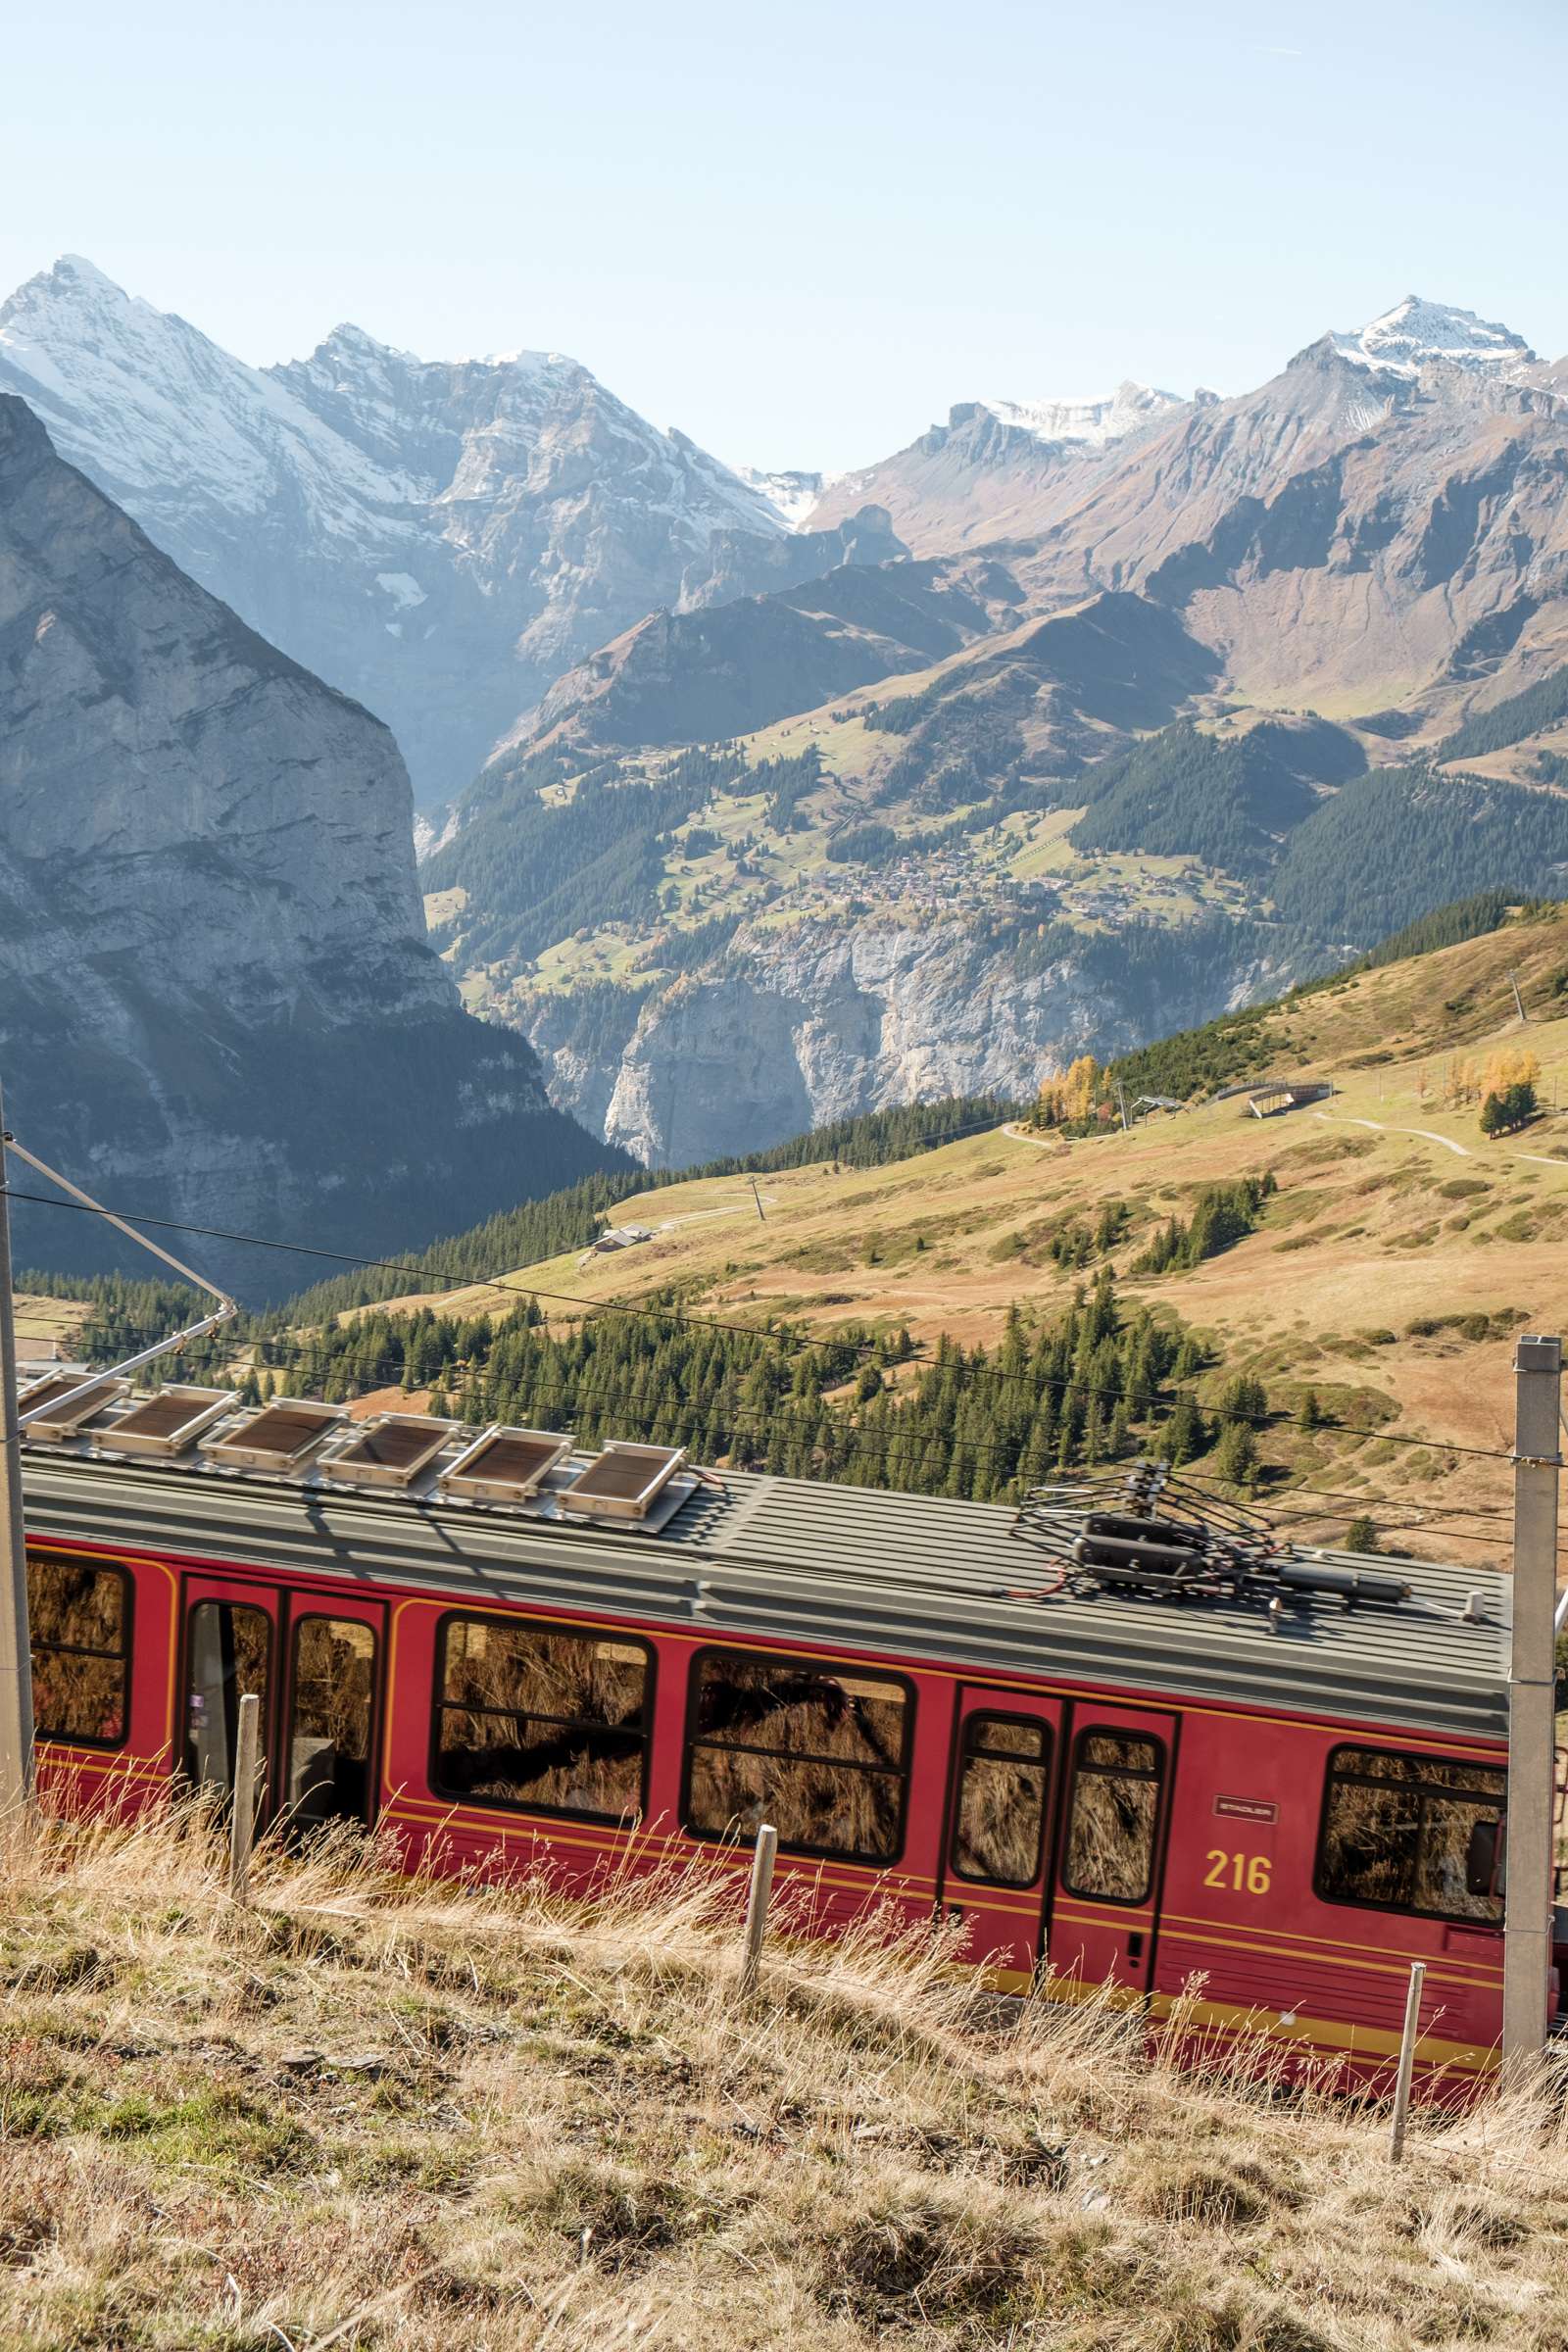 A view of Mürren with the Jungfrau train passing in the foreground